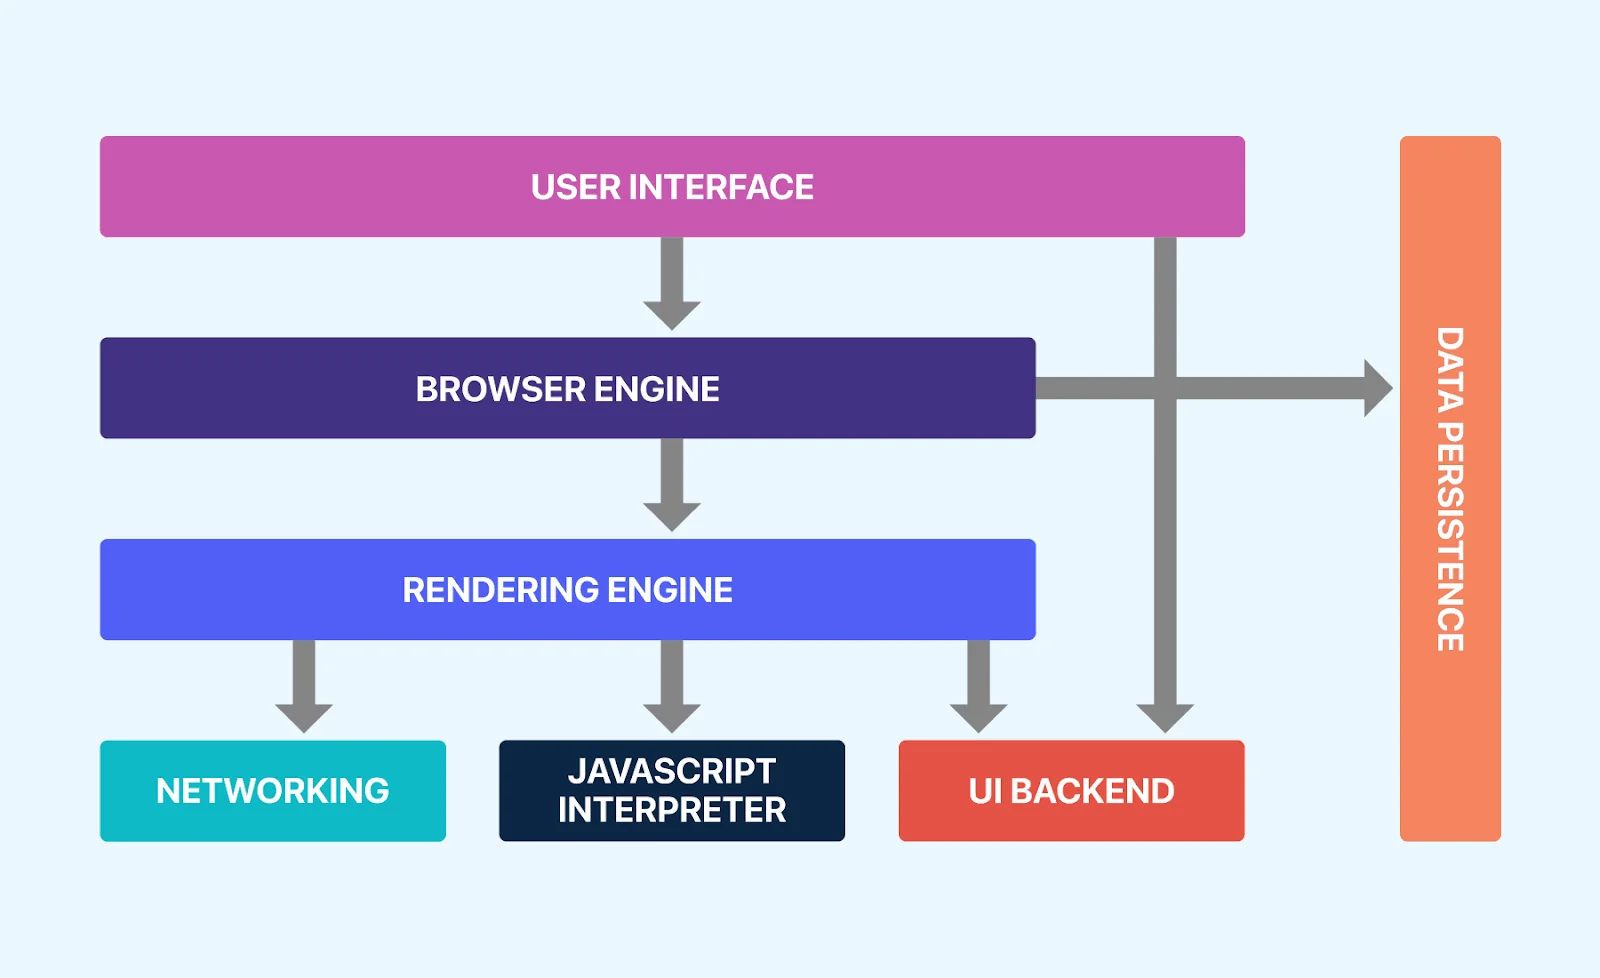 Architecture of a browser